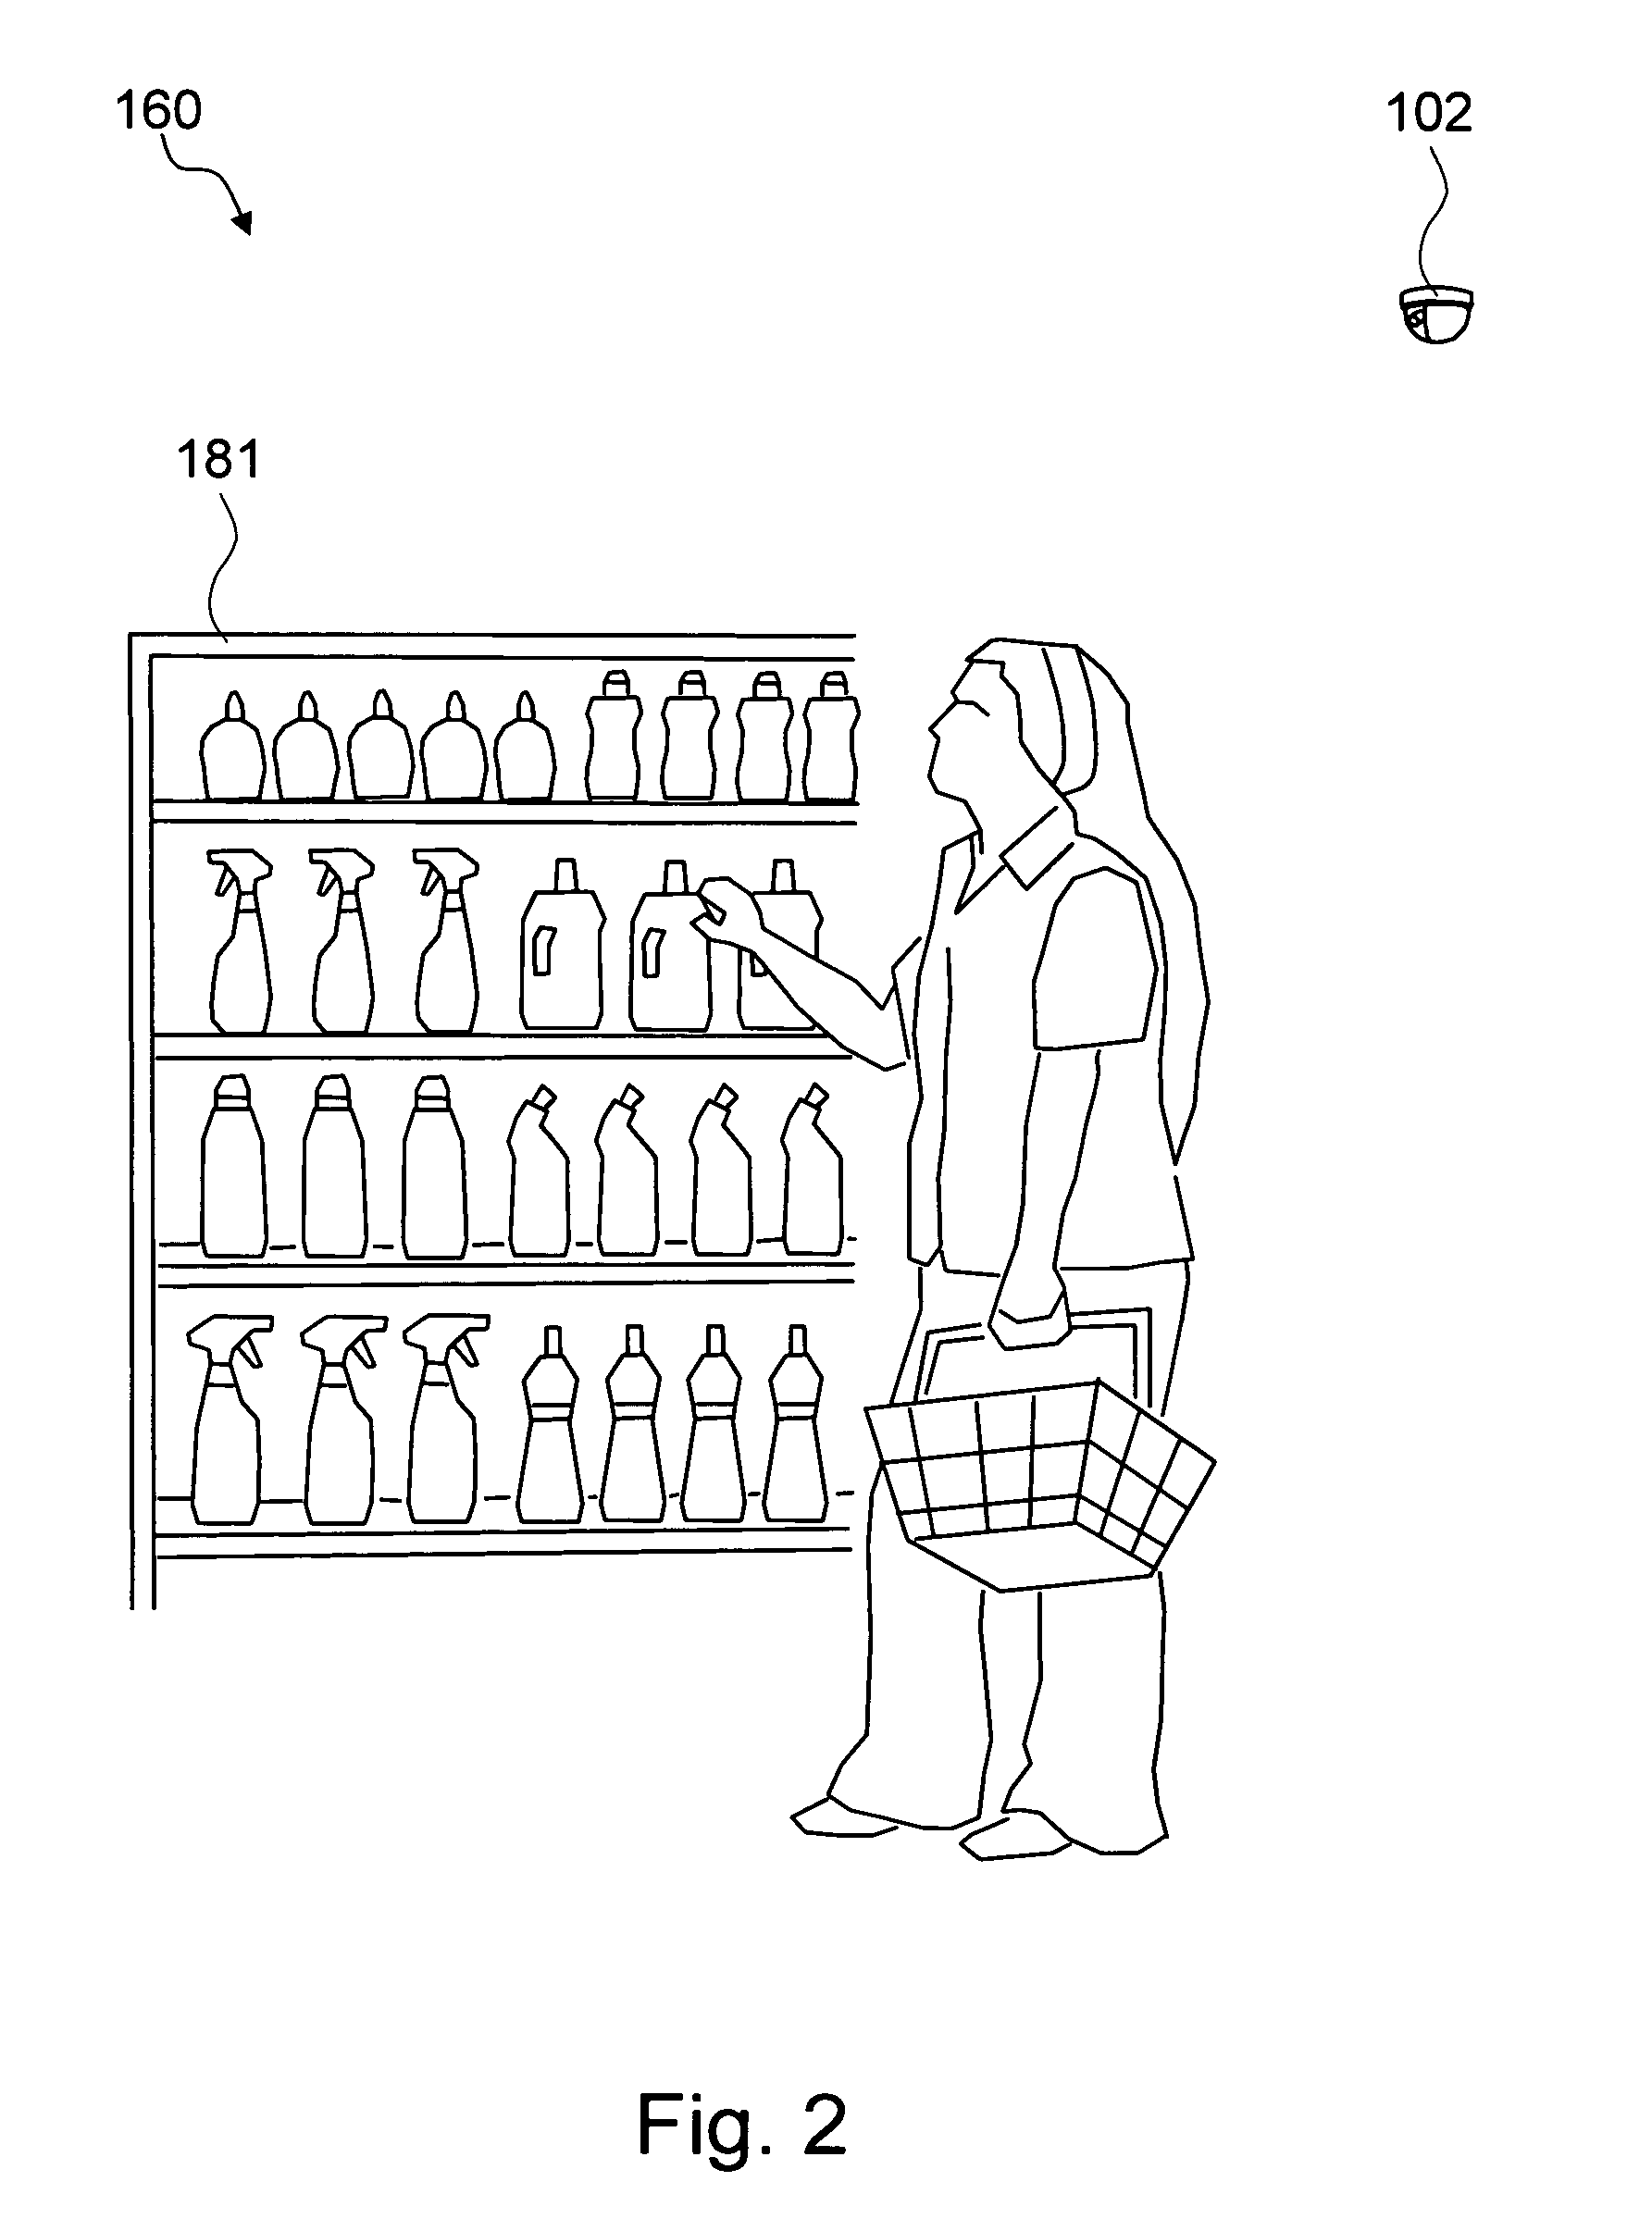 Method and system for automatically analyzing categories in a physical space based on the visual characterization of people